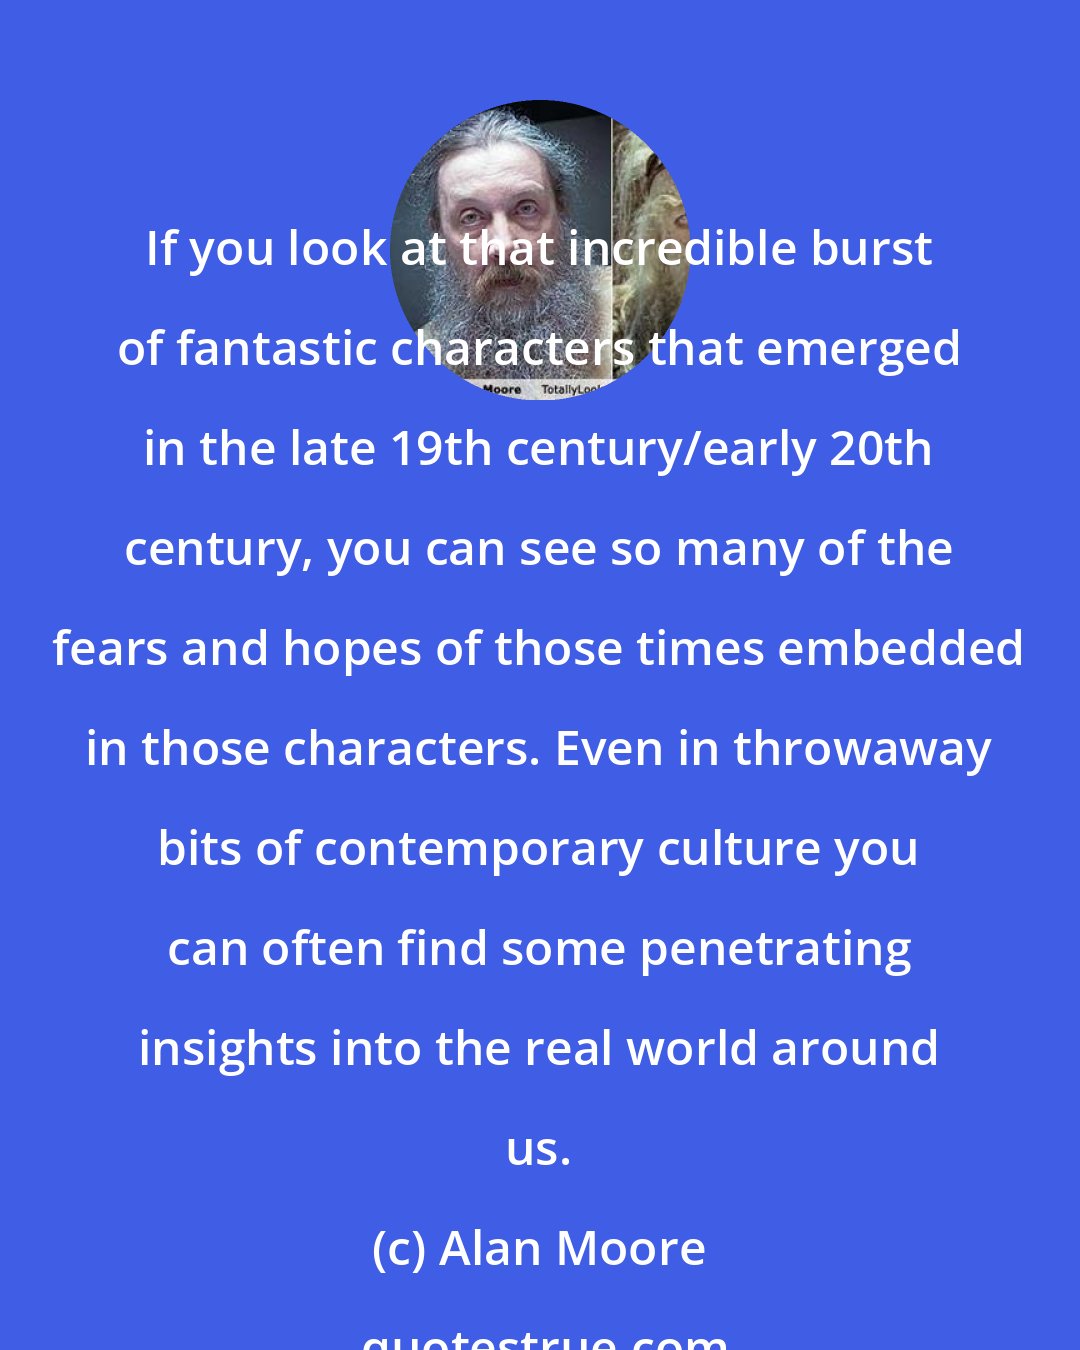 Alan Moore: If you look at that incredible burst of fantastic characters that emerged in the late 19th century/early 20th century, you can see so many of the fears and hopes of those times embedded in those characters. Even in throwaway bits of contemporary culture you can often find some penetrating insights into the real world around us.